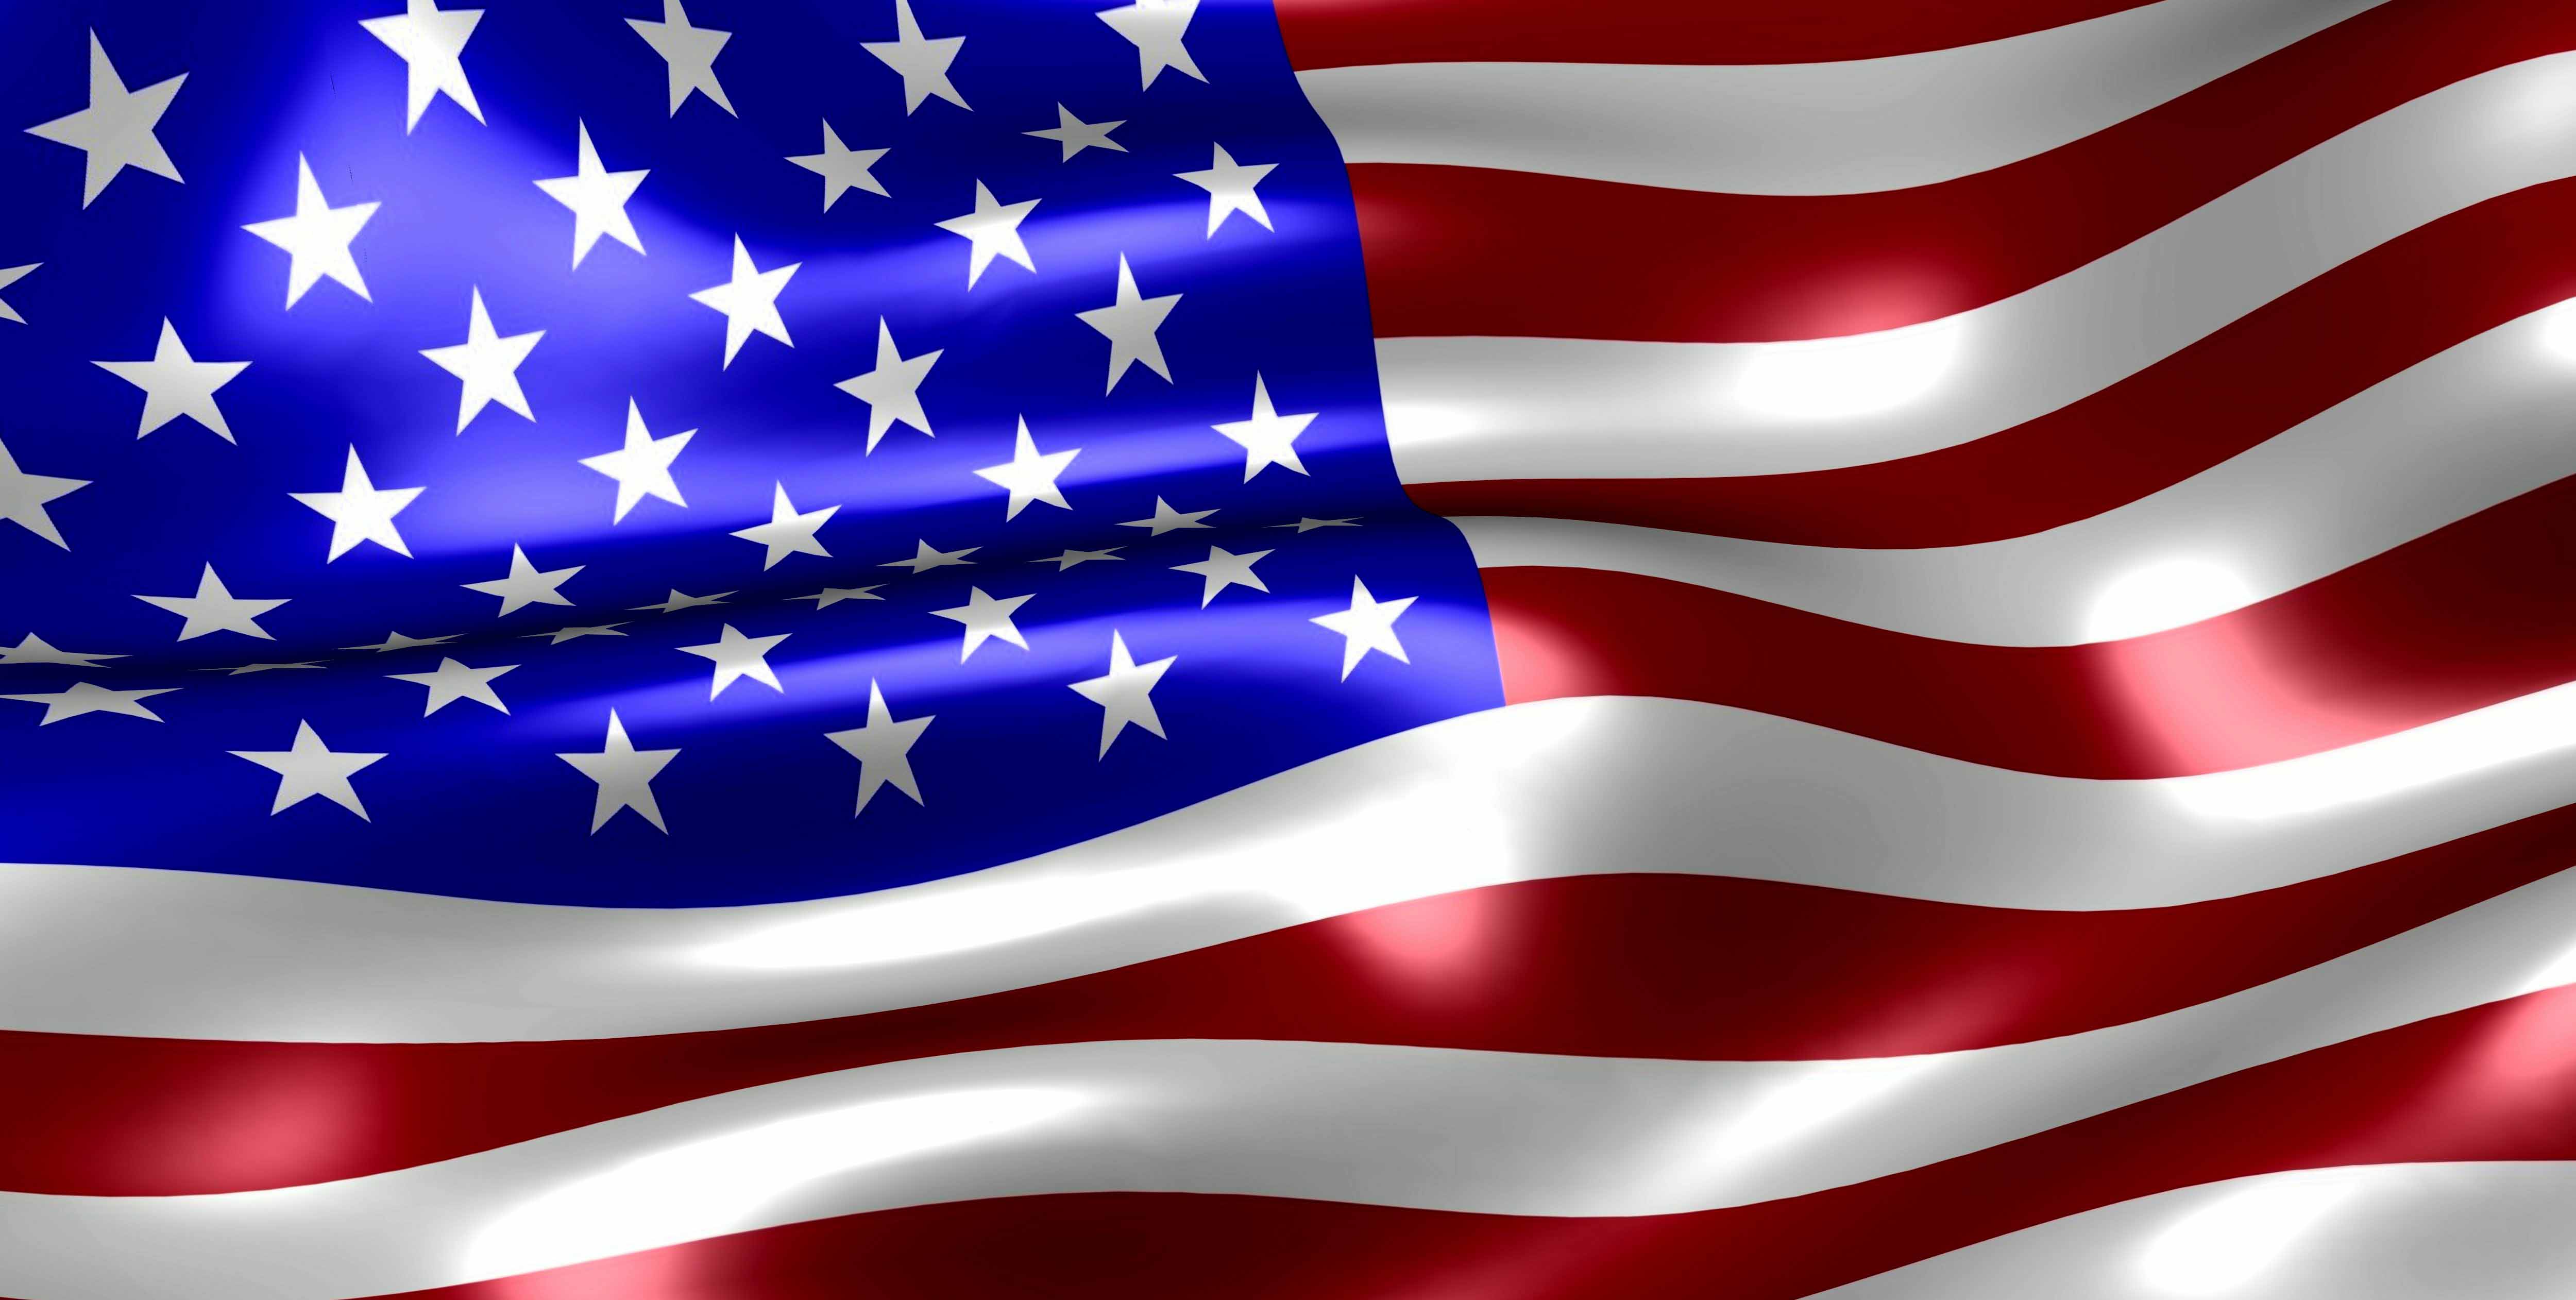 USA Flag Hd Wallpapers Free Download | New HD Wallpapers Download